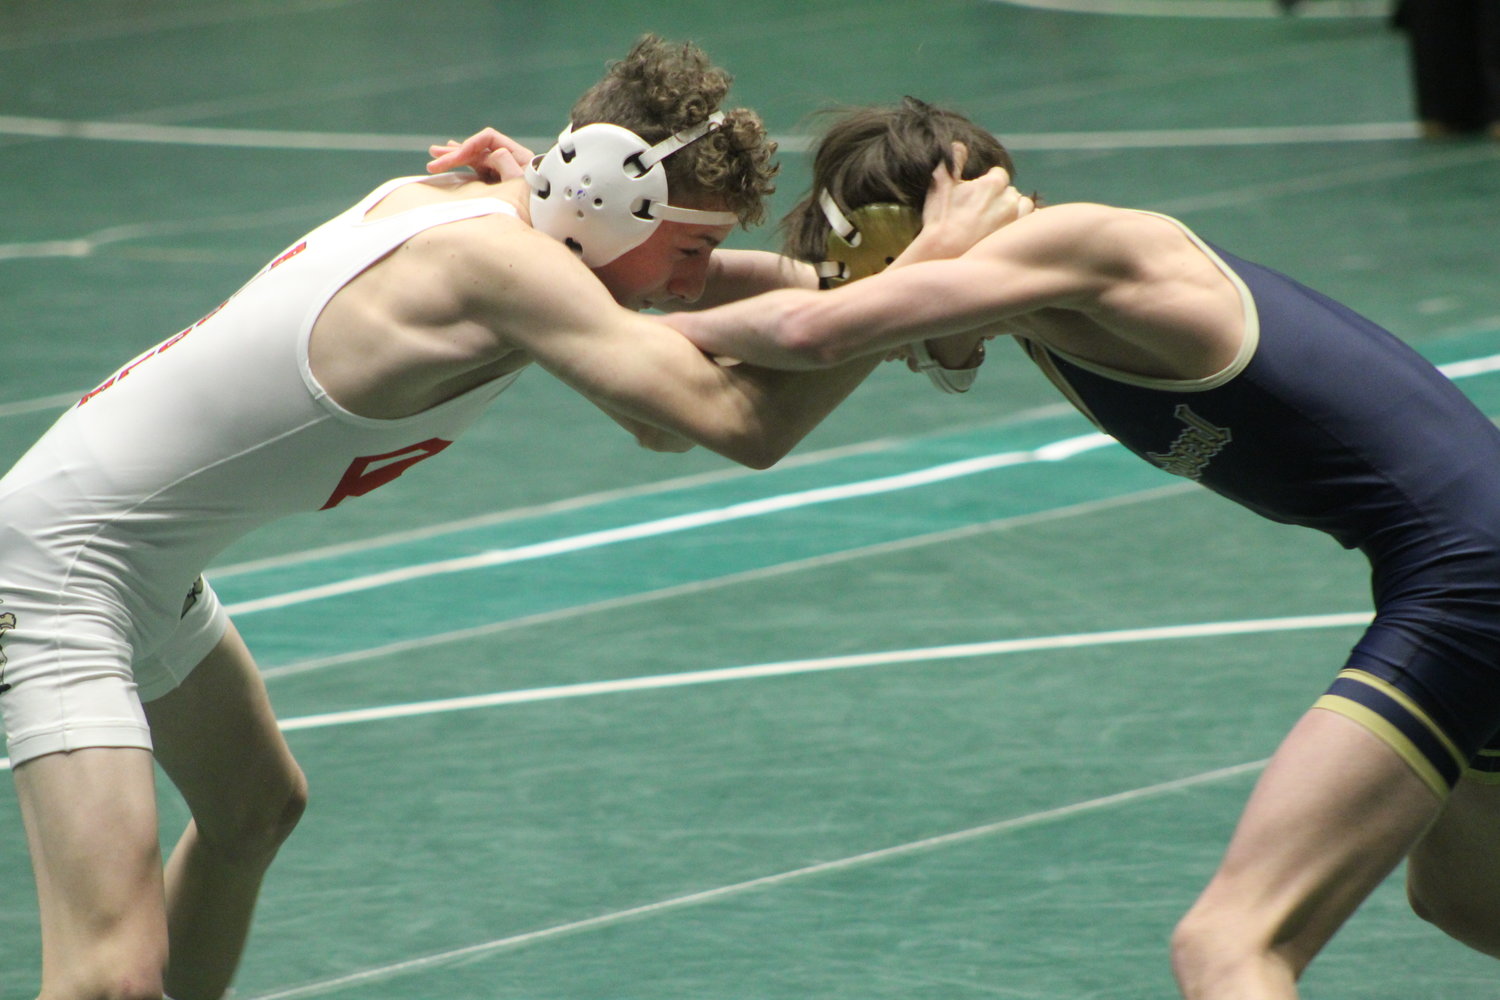 Southmont junior Brier Riggle made his first semi-state appearance and ended his season with a record of 25-10